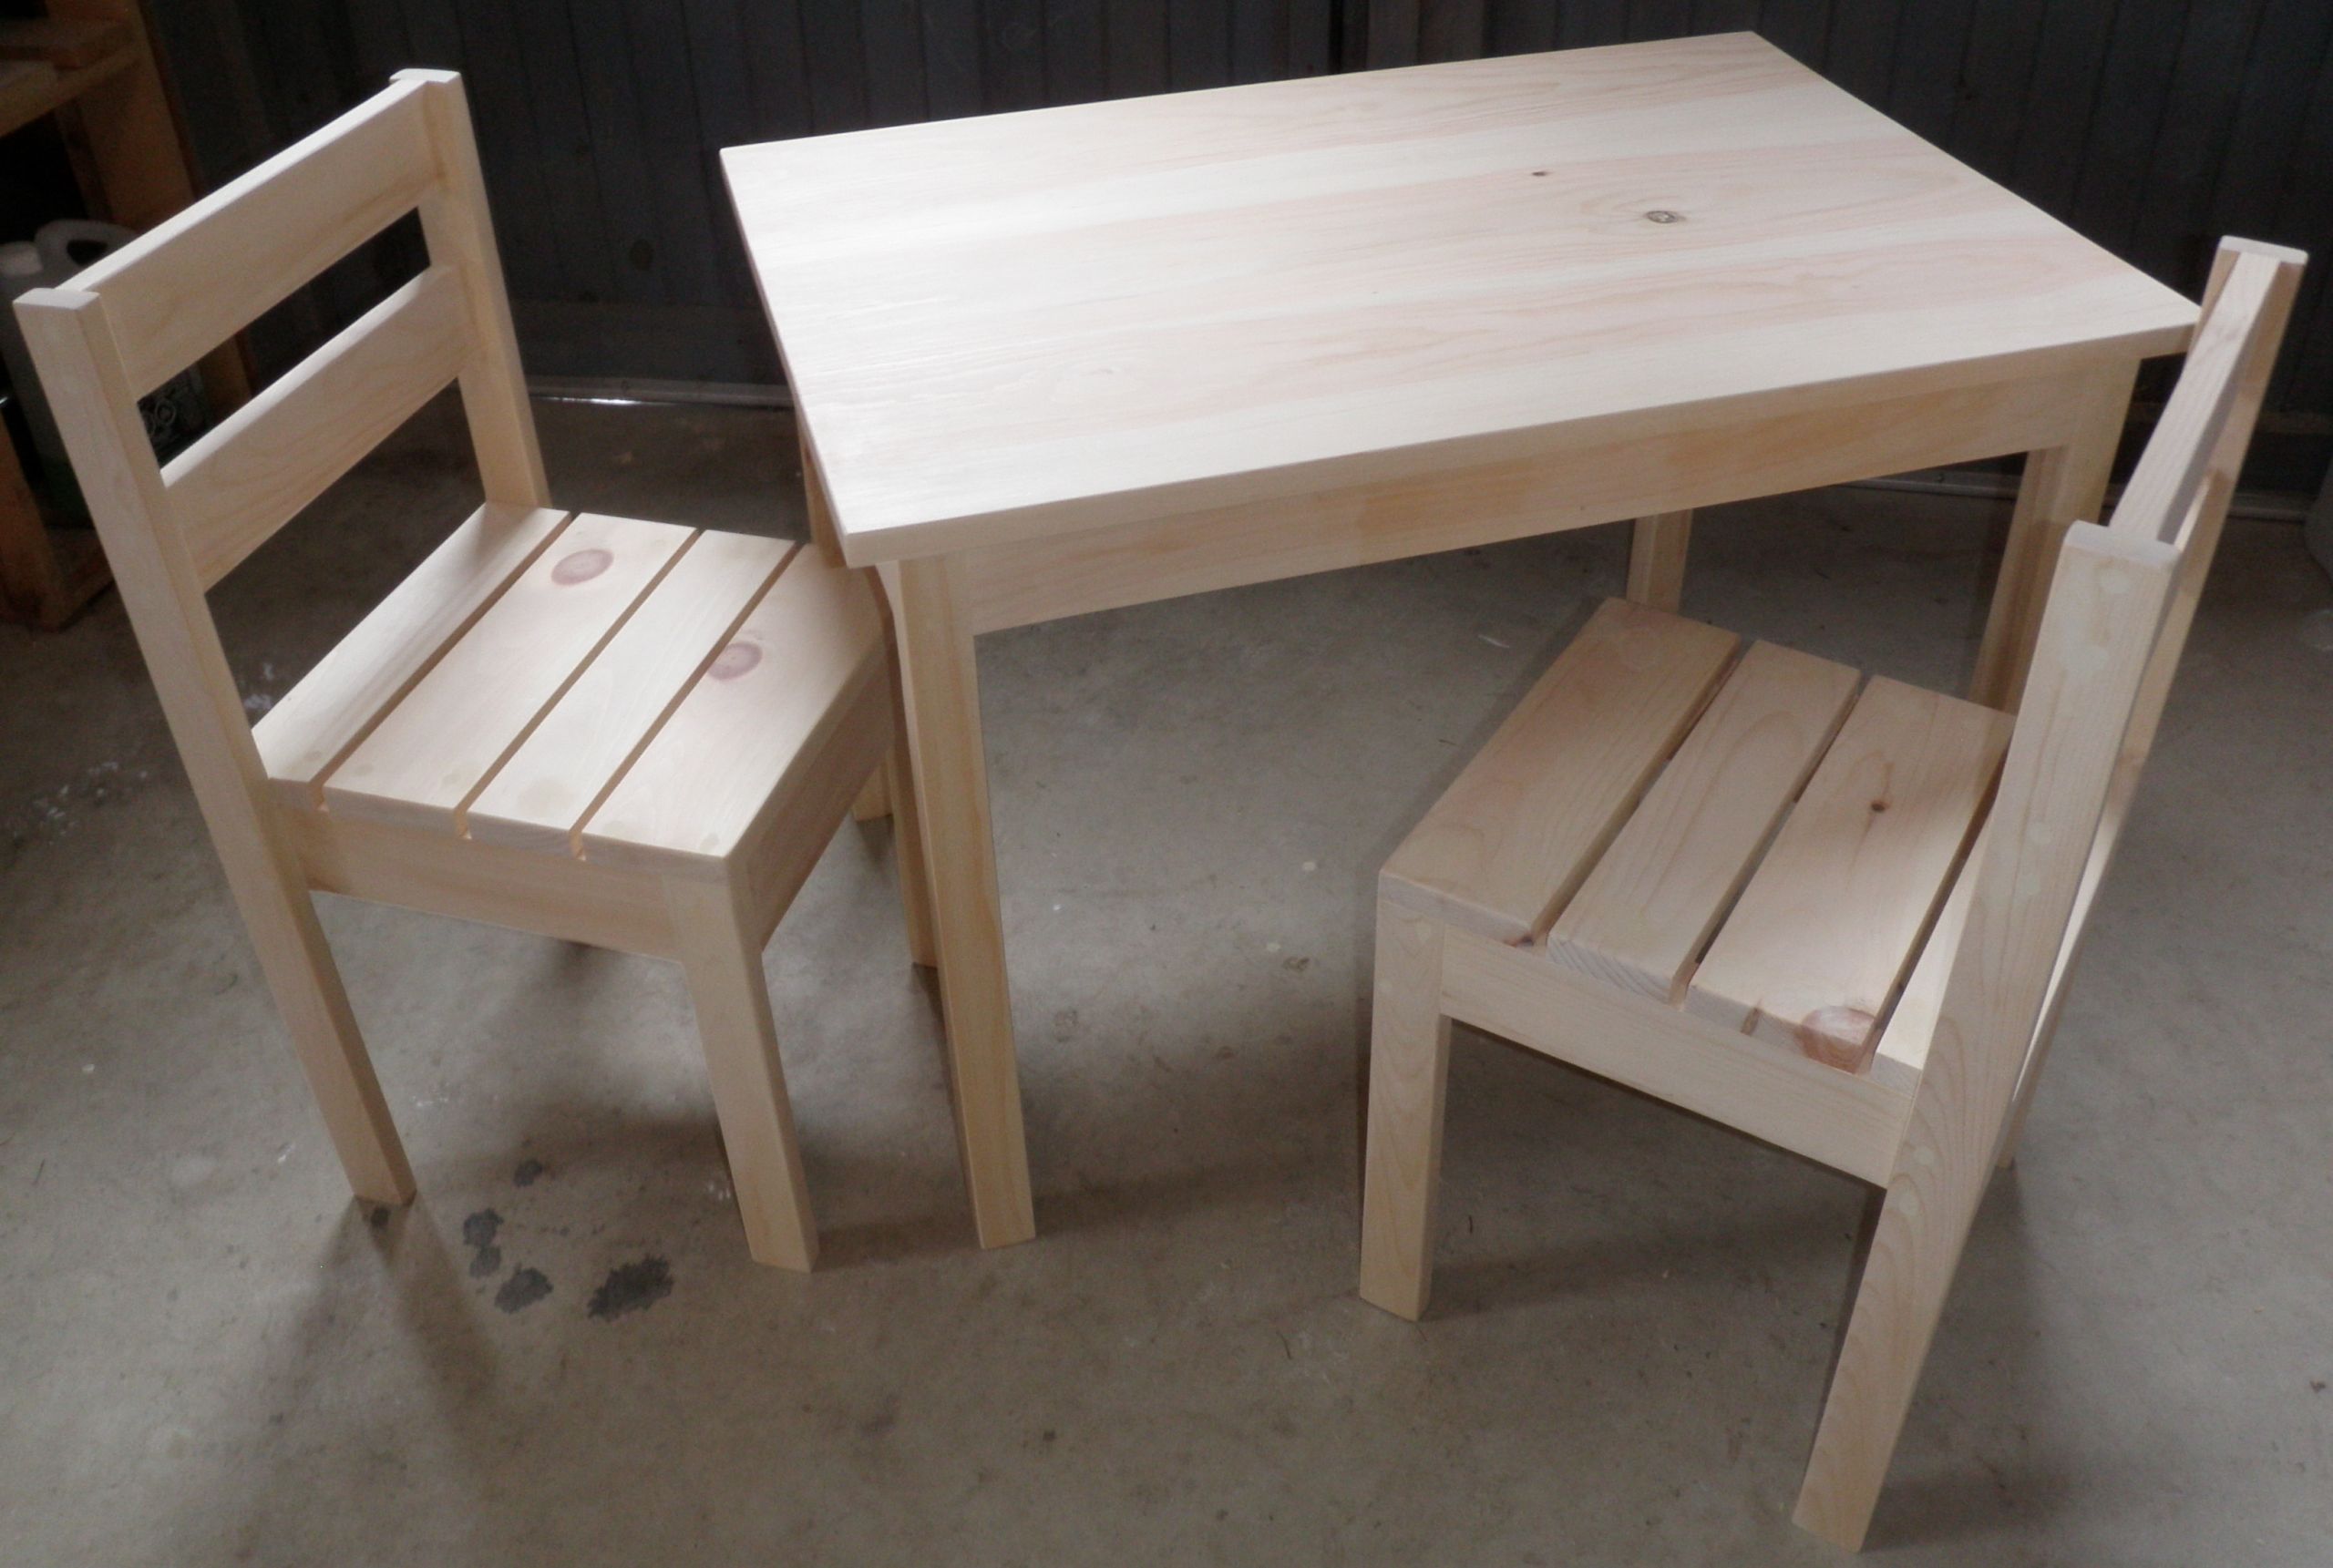 DIY Toddler Table And Chairs
 Ana White